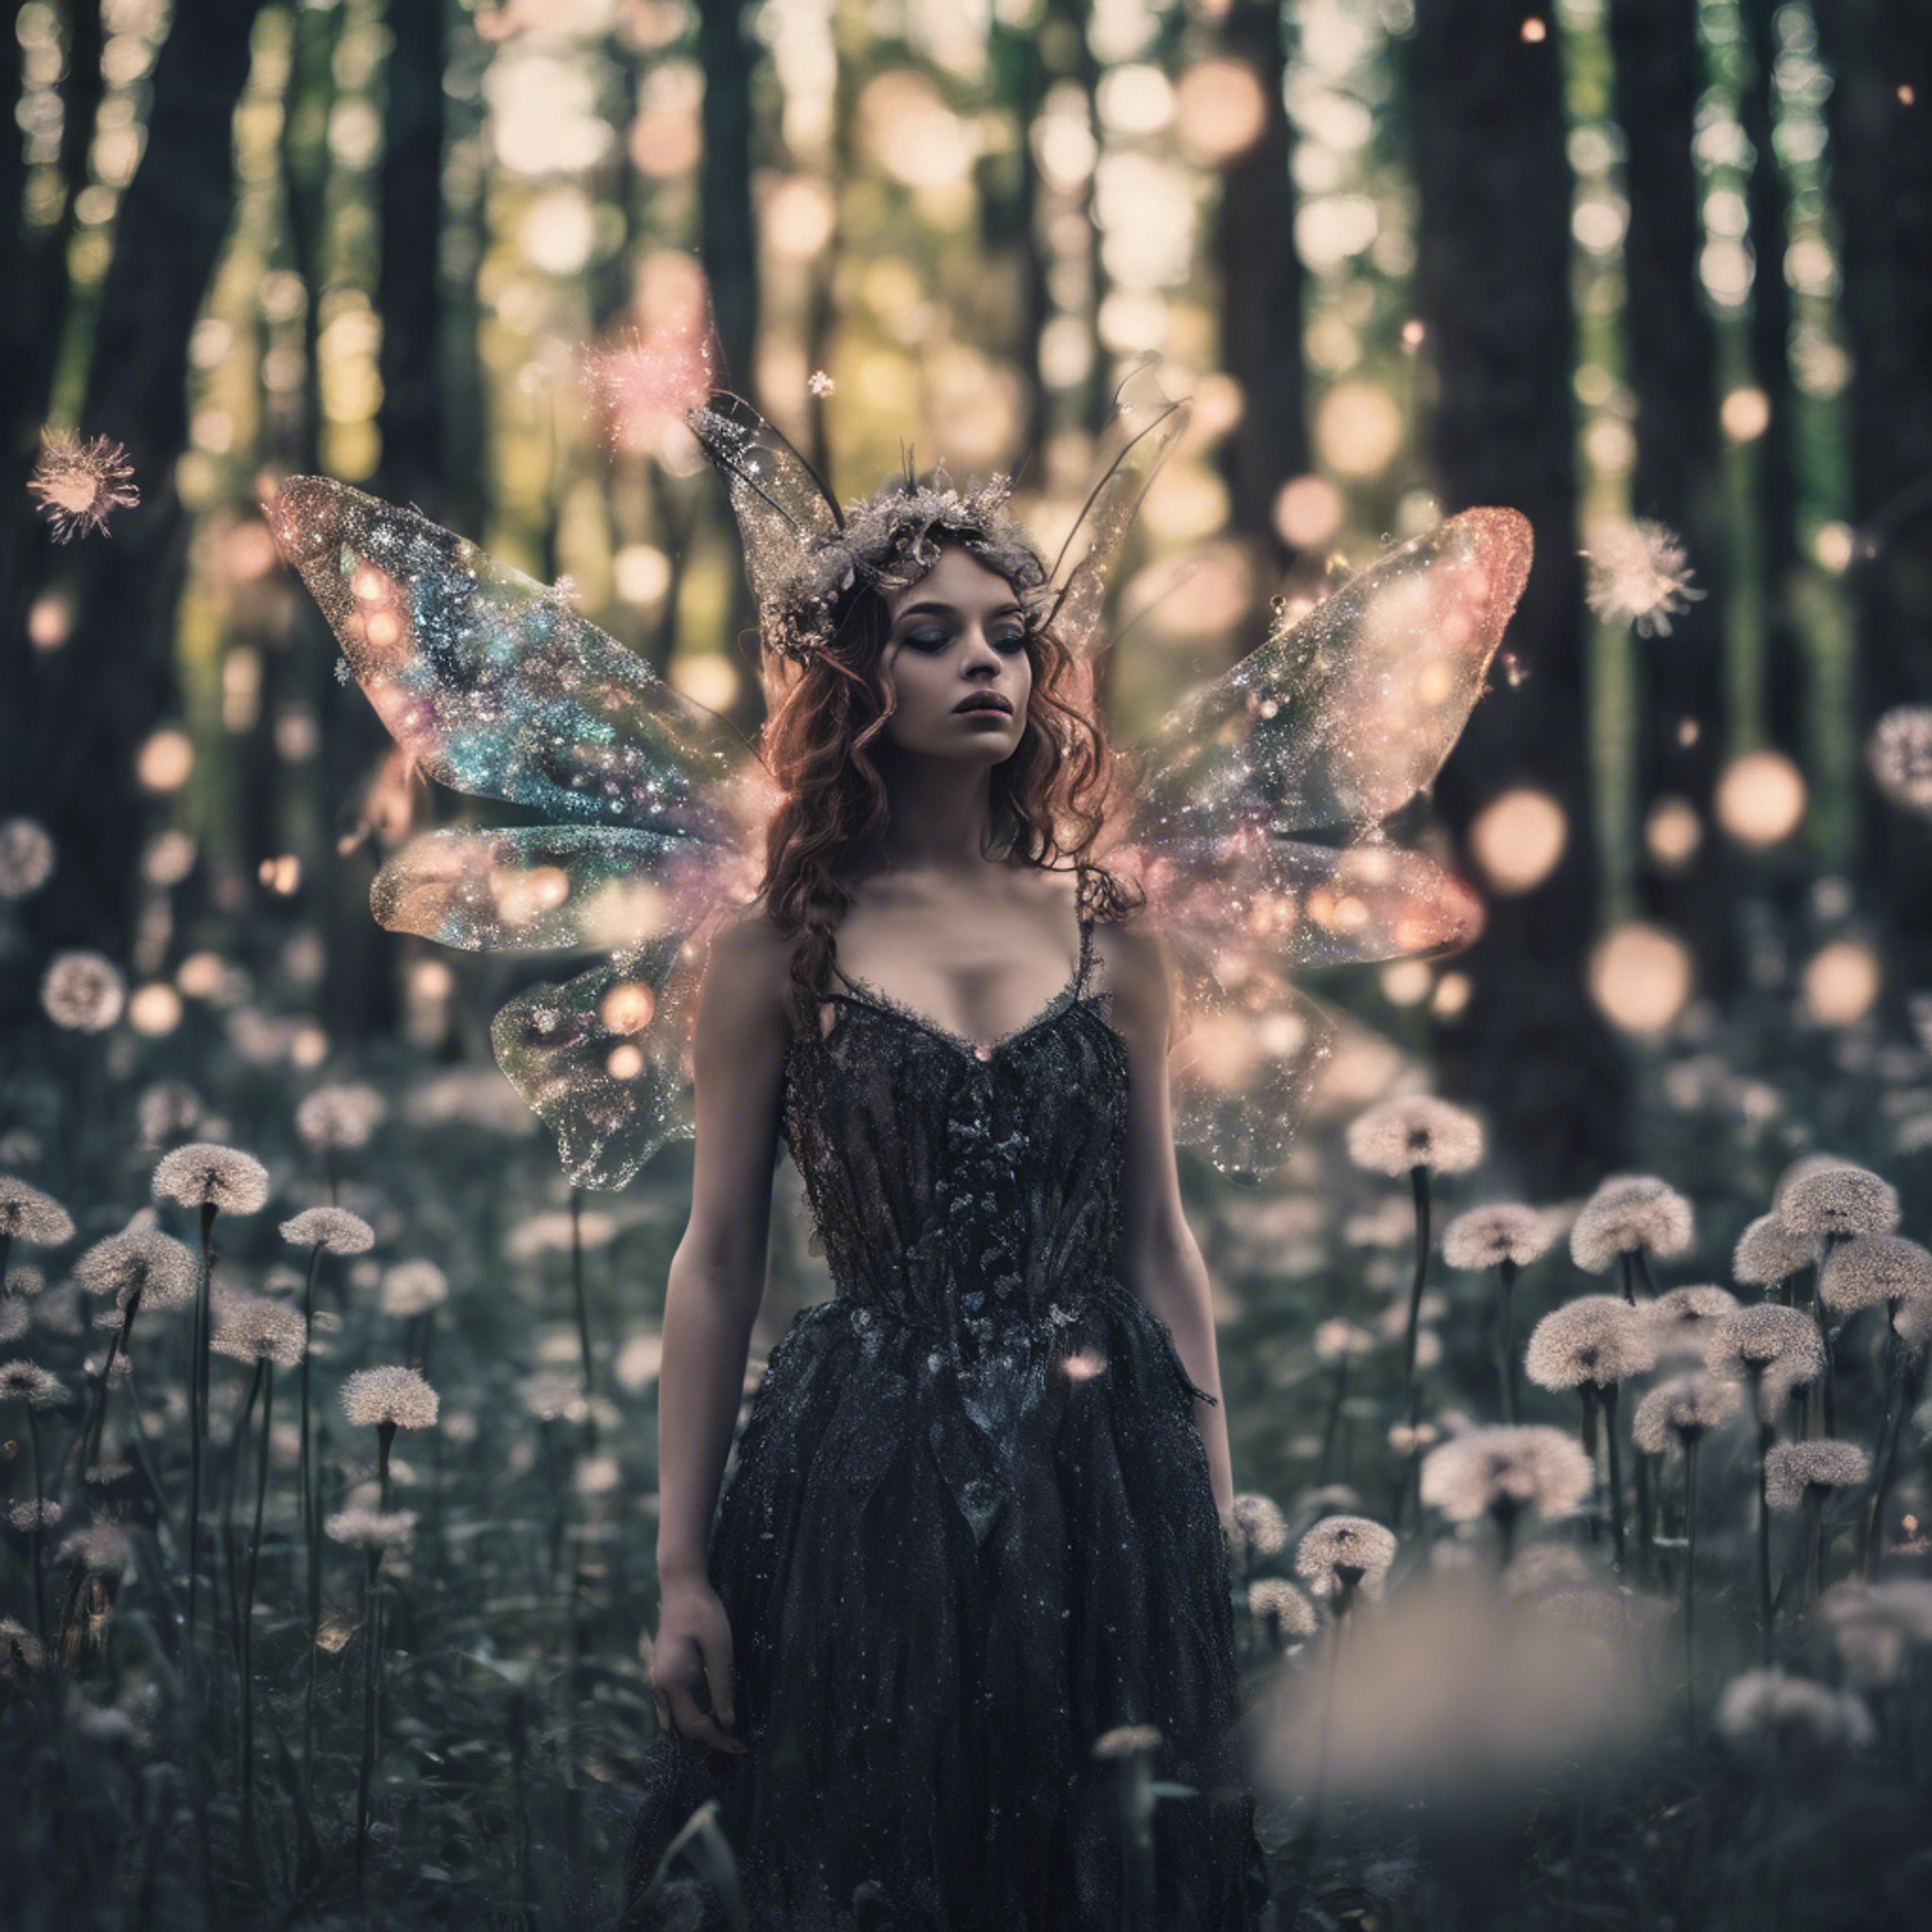 A whimsical gothic fairy flitting amongst shimmering neon dandelions in a magical forest. Wallpaper[faf2f07637684554a979]